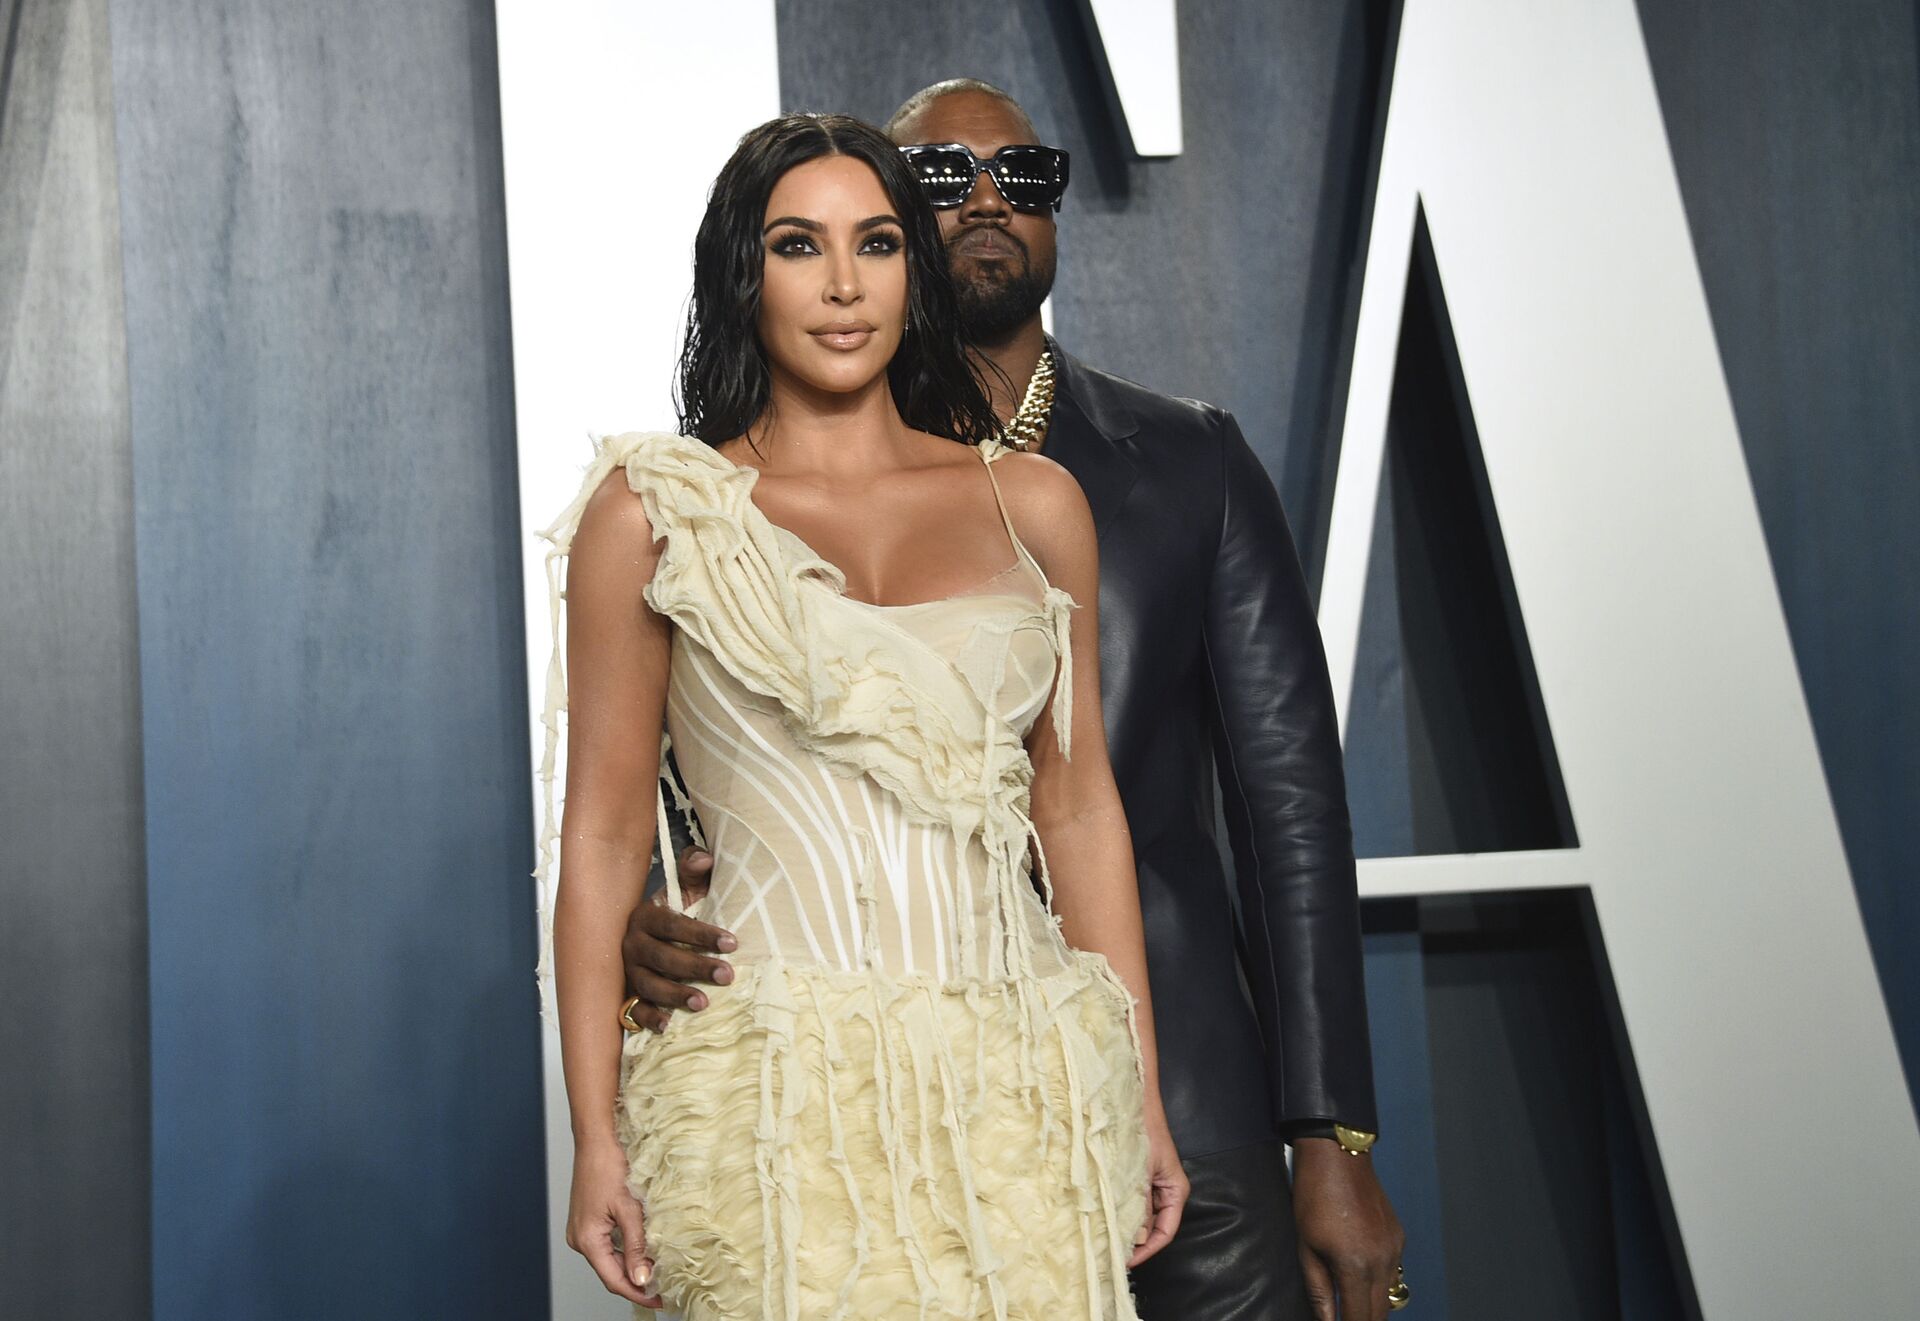 Kanye West Believes 2020 Presidential Campaign 'Cost Him His Marriage', Reports Say - Sputnik International, 1920, 20.02.2021